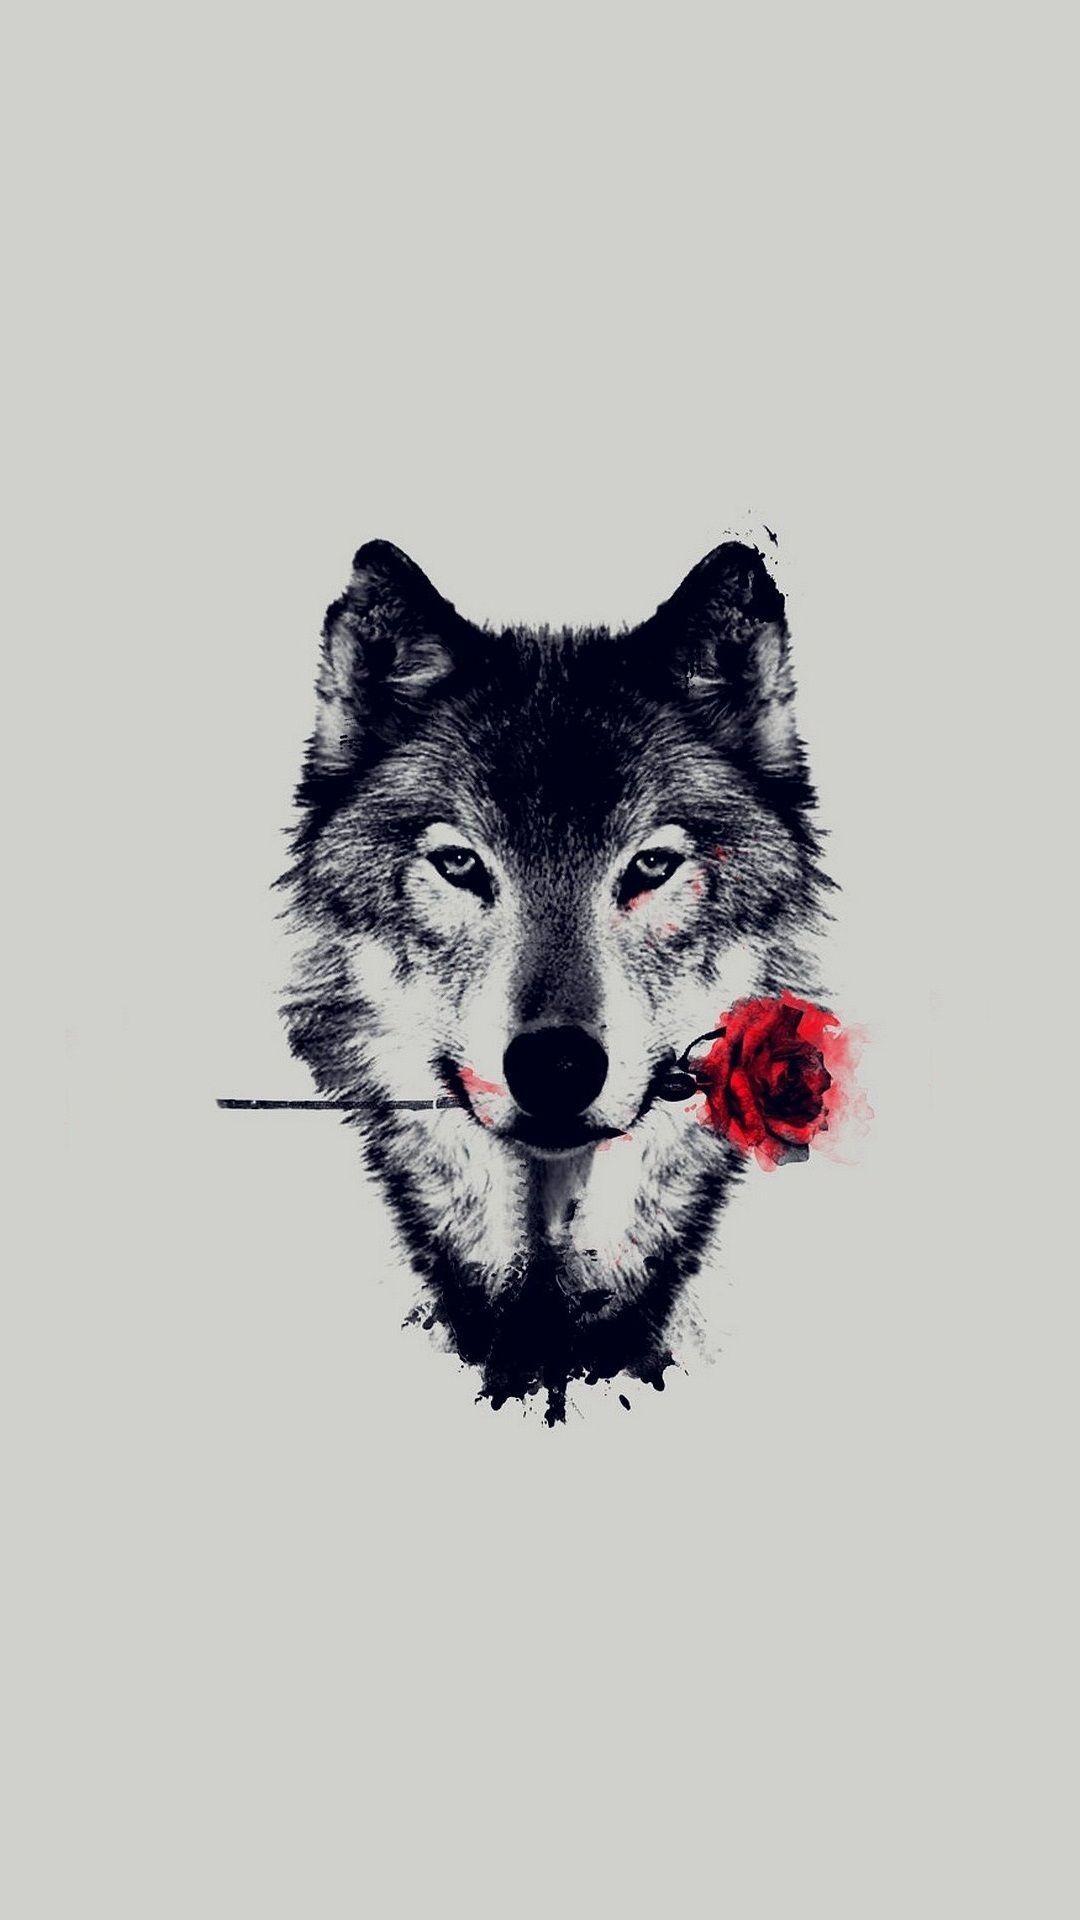 Wolf Wallpaper HD For iPhone Wallpaper on Hupages.com, if you like it dont forget save it or repin it. Have. Art wallpaper iphone, iPhone wallpaper wolf, Rose art